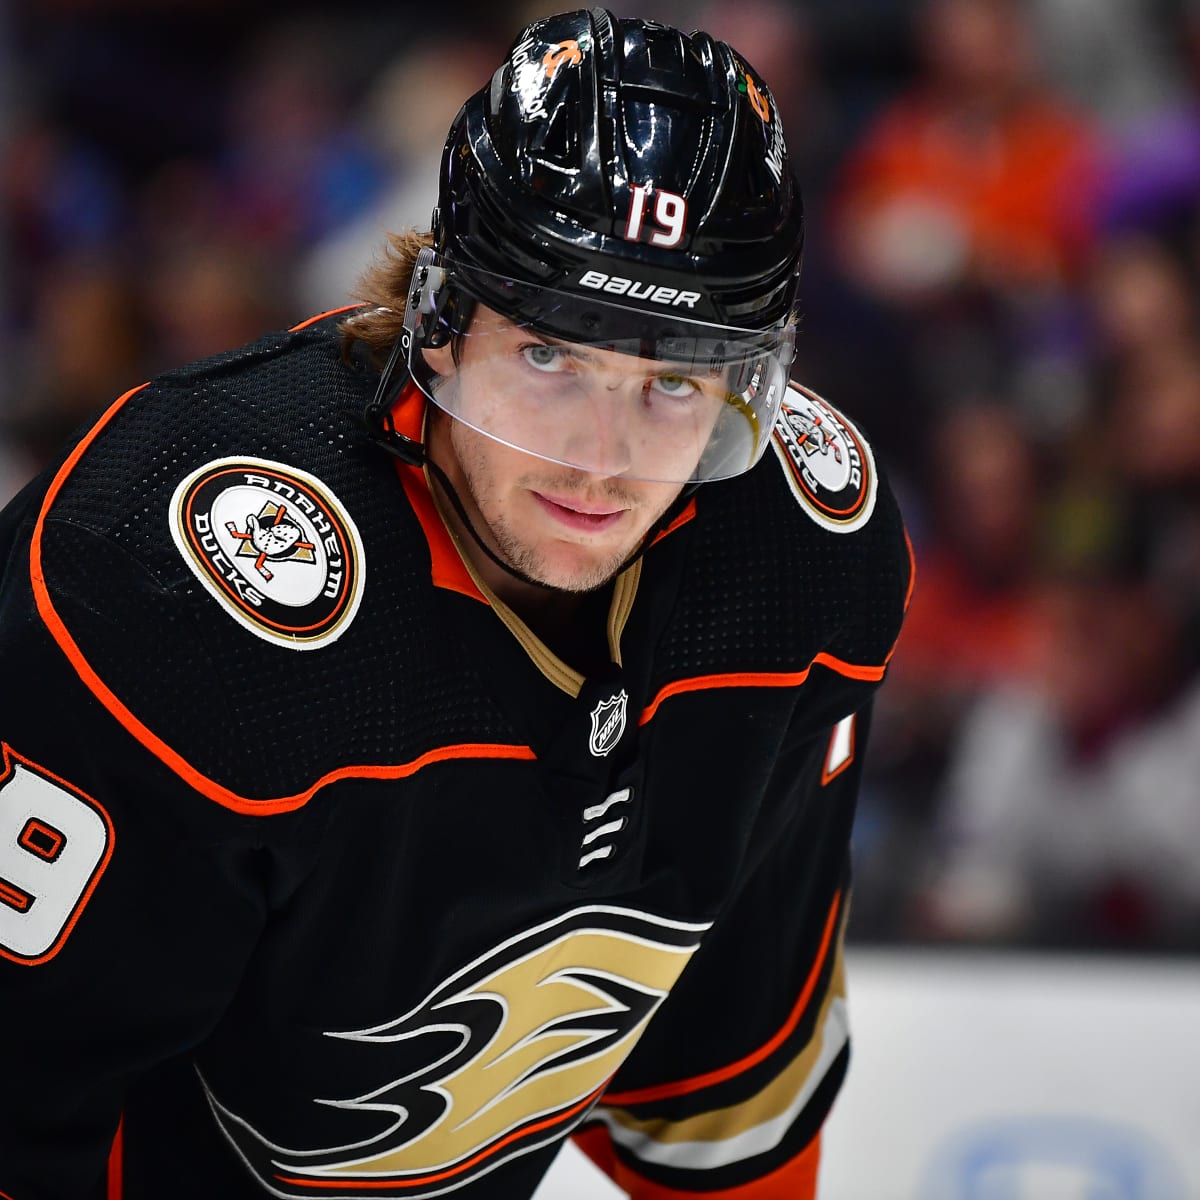 Ducks Sign Curran to Two-Year Contract